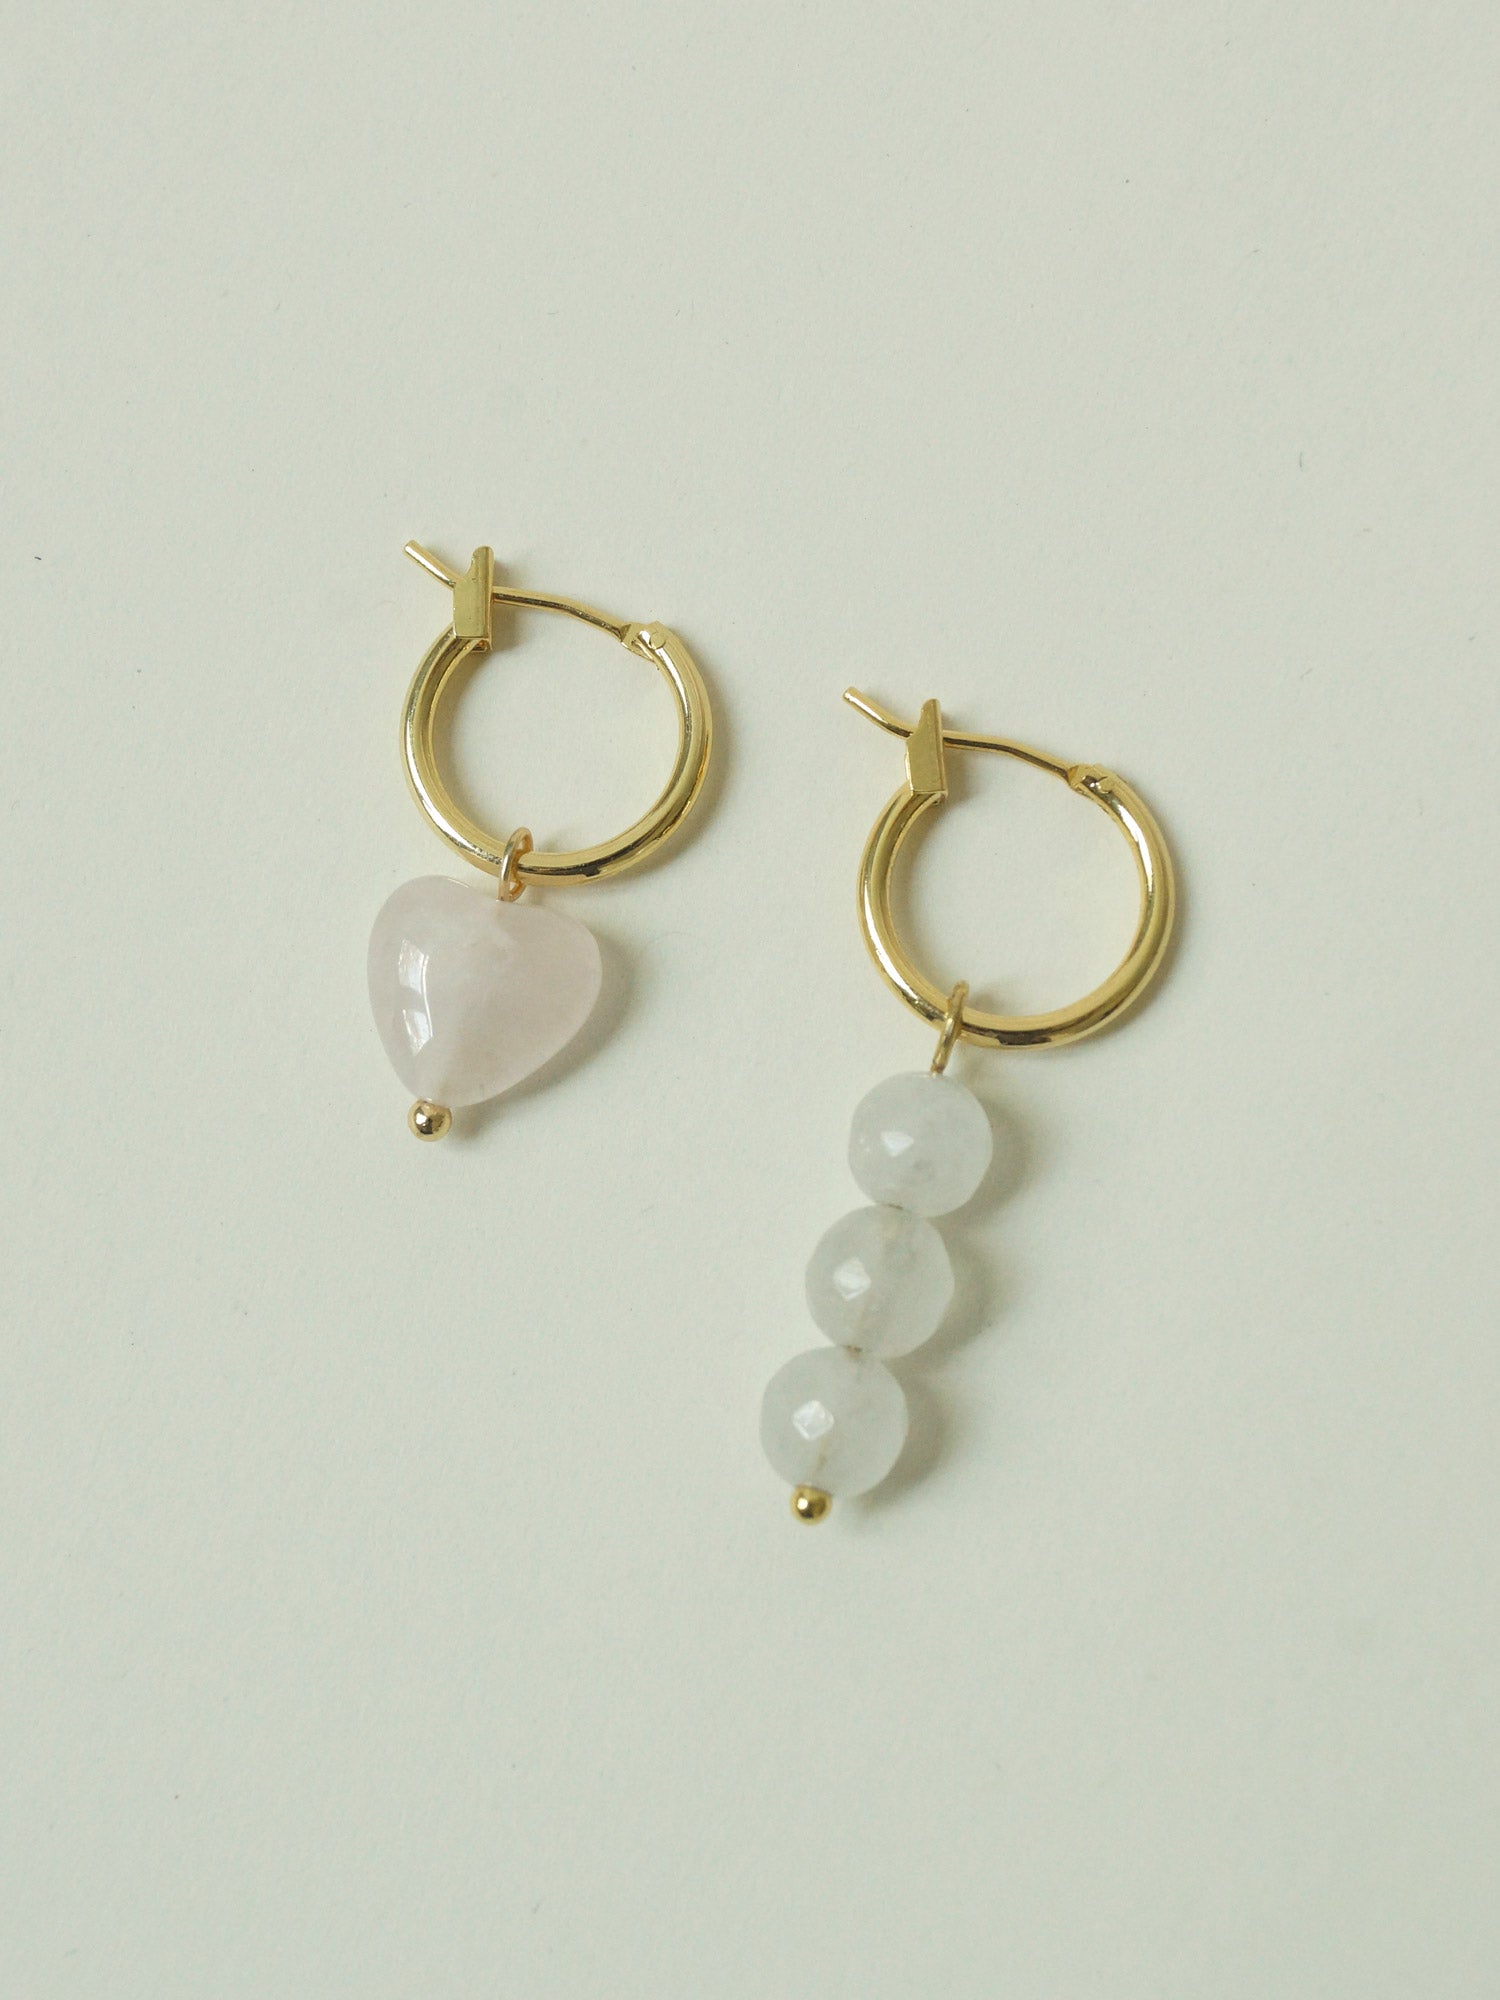 Little Stone Heart Mismatched Hoops - Pink/White